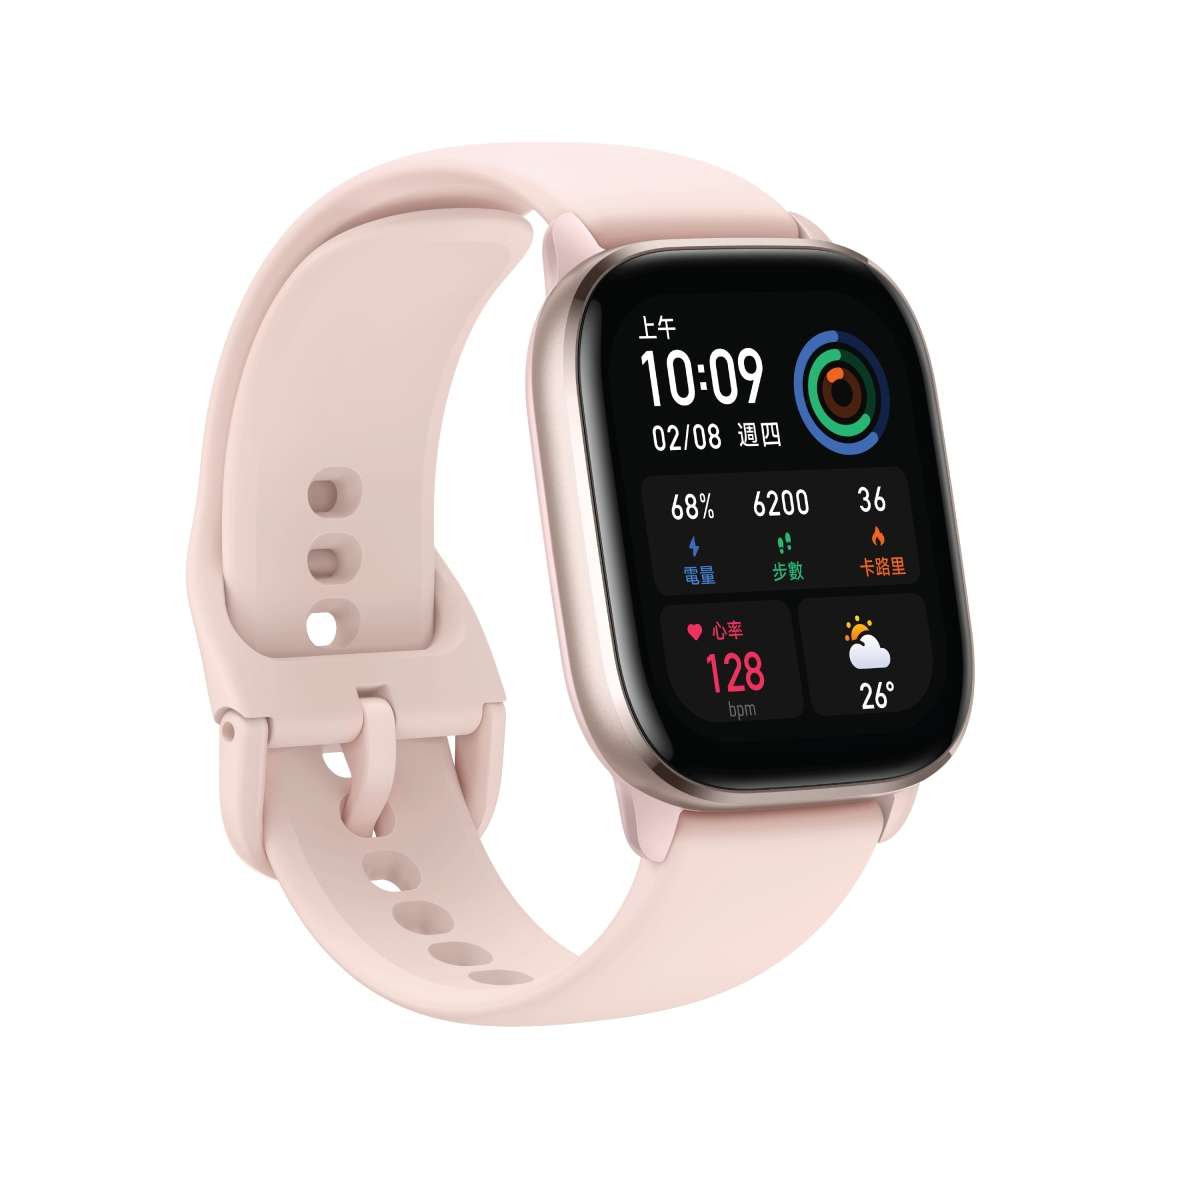 Amazfit Smart Watch for Women with GPS & 4 Sensor Types